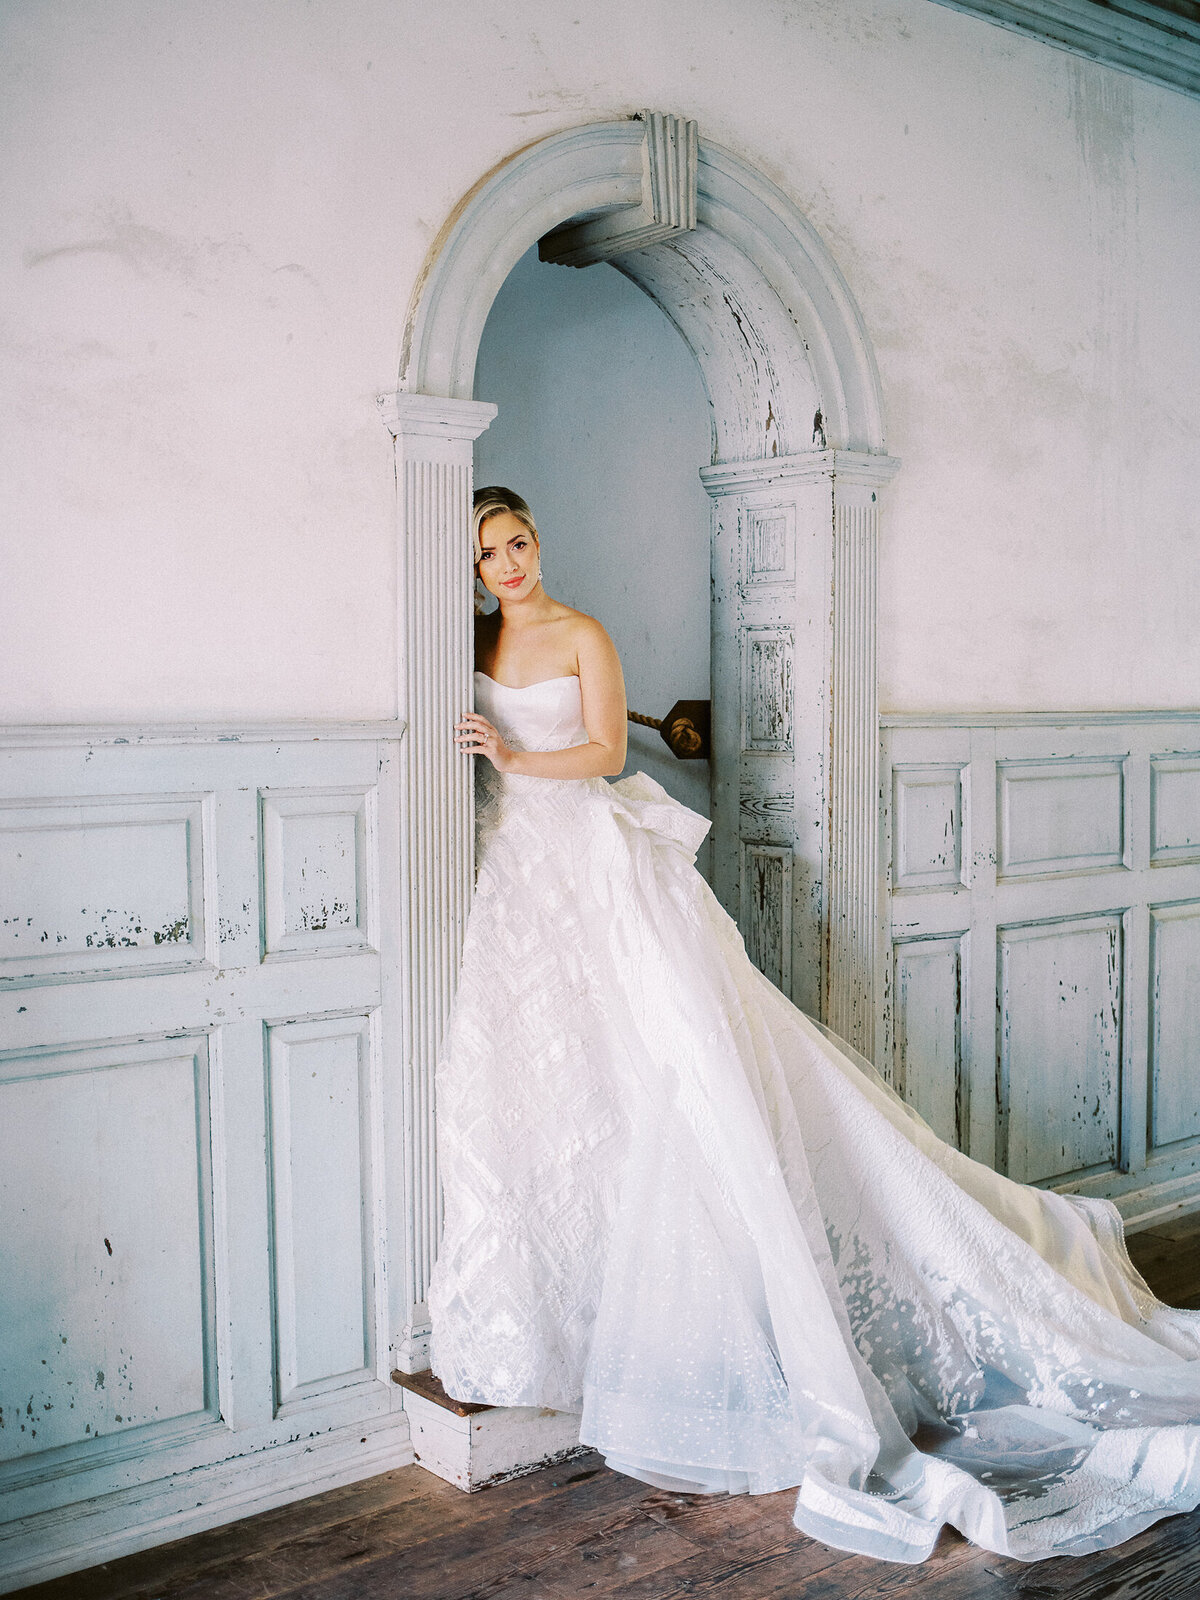 Jenny-Haas-Photography-Luxury-DC-Planner-Prof-Jimmy-Choo-Wedding-Gown-Luxe-11